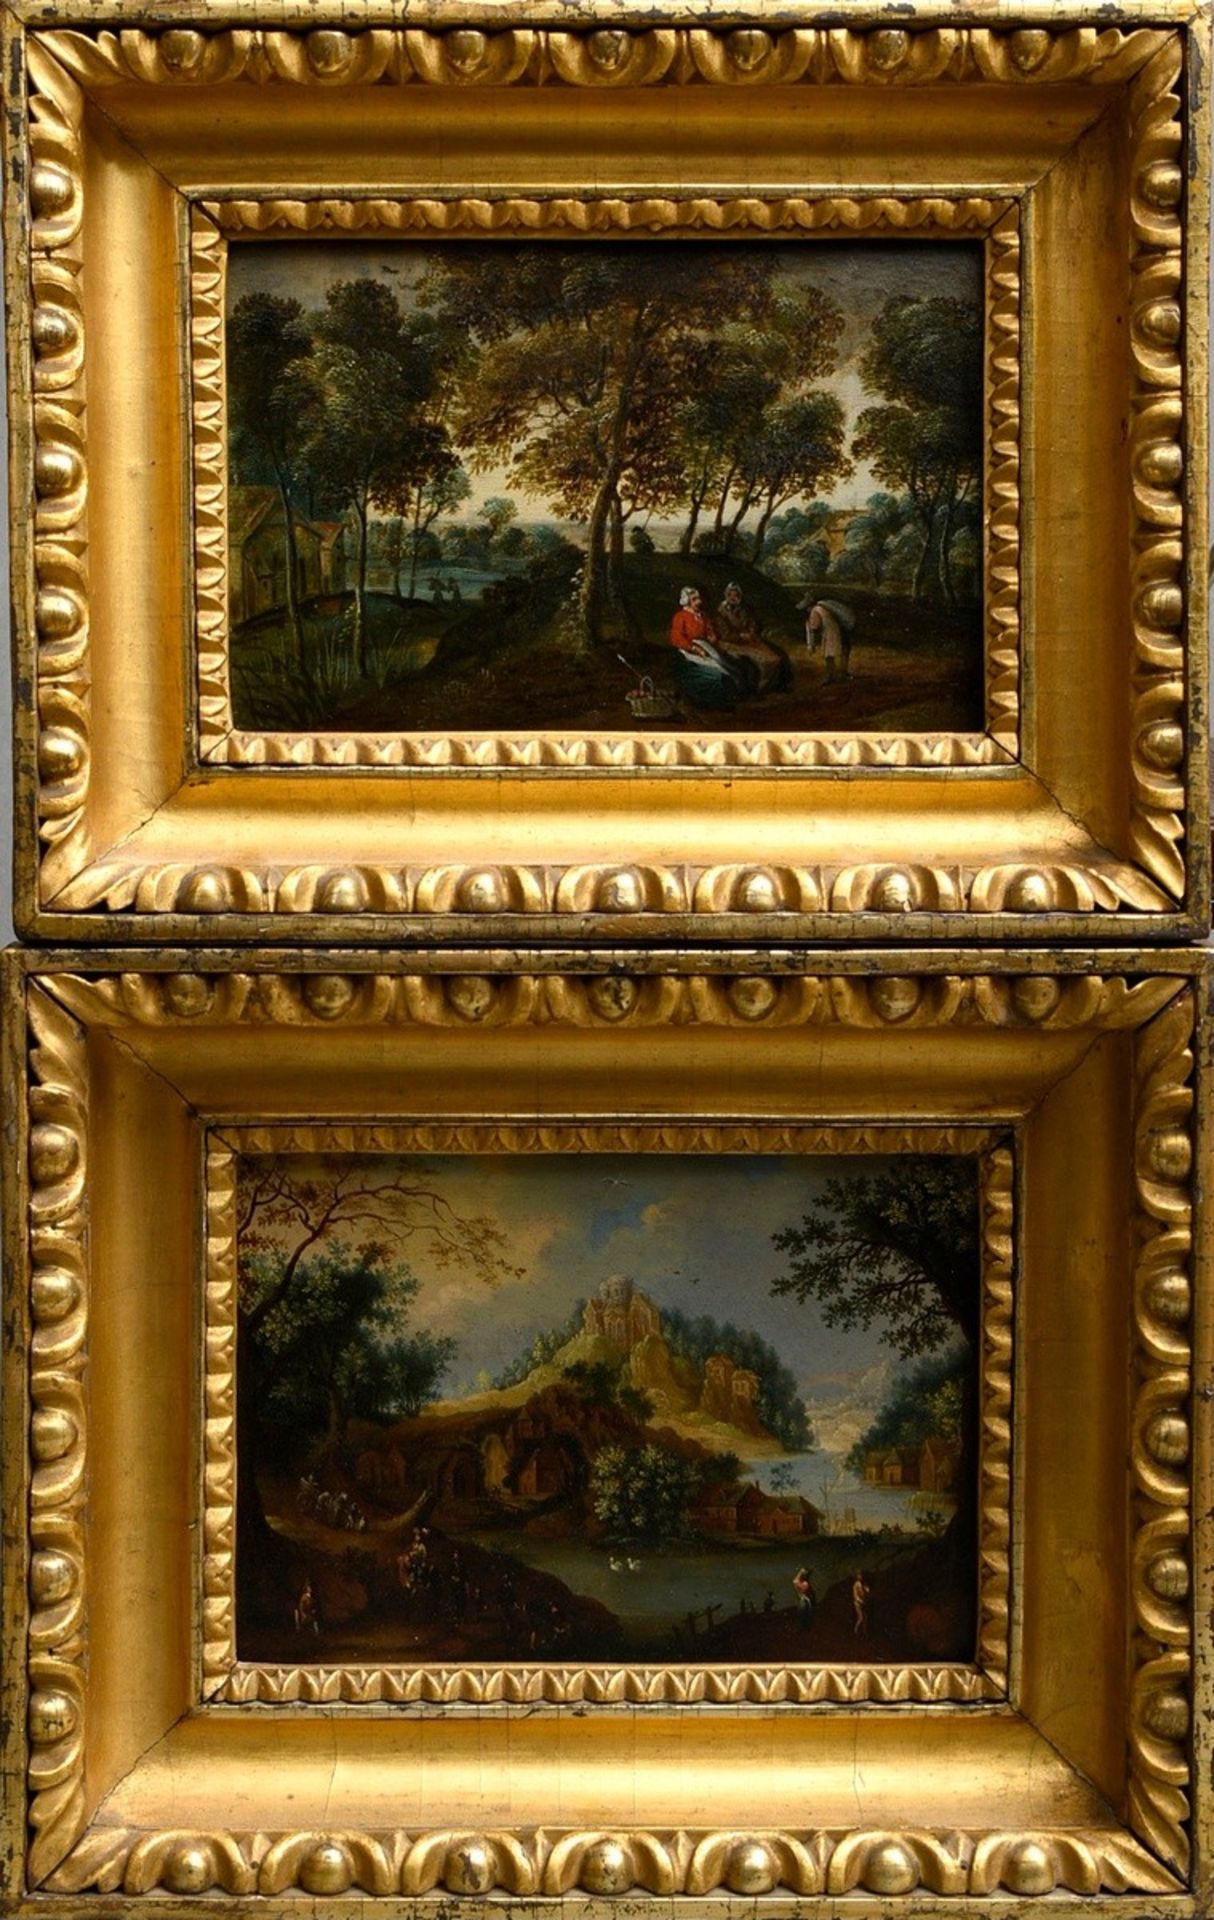 Pair of small paintings by an unknown artist of the 17th/18th c. "River Landscapes", oil/copper res